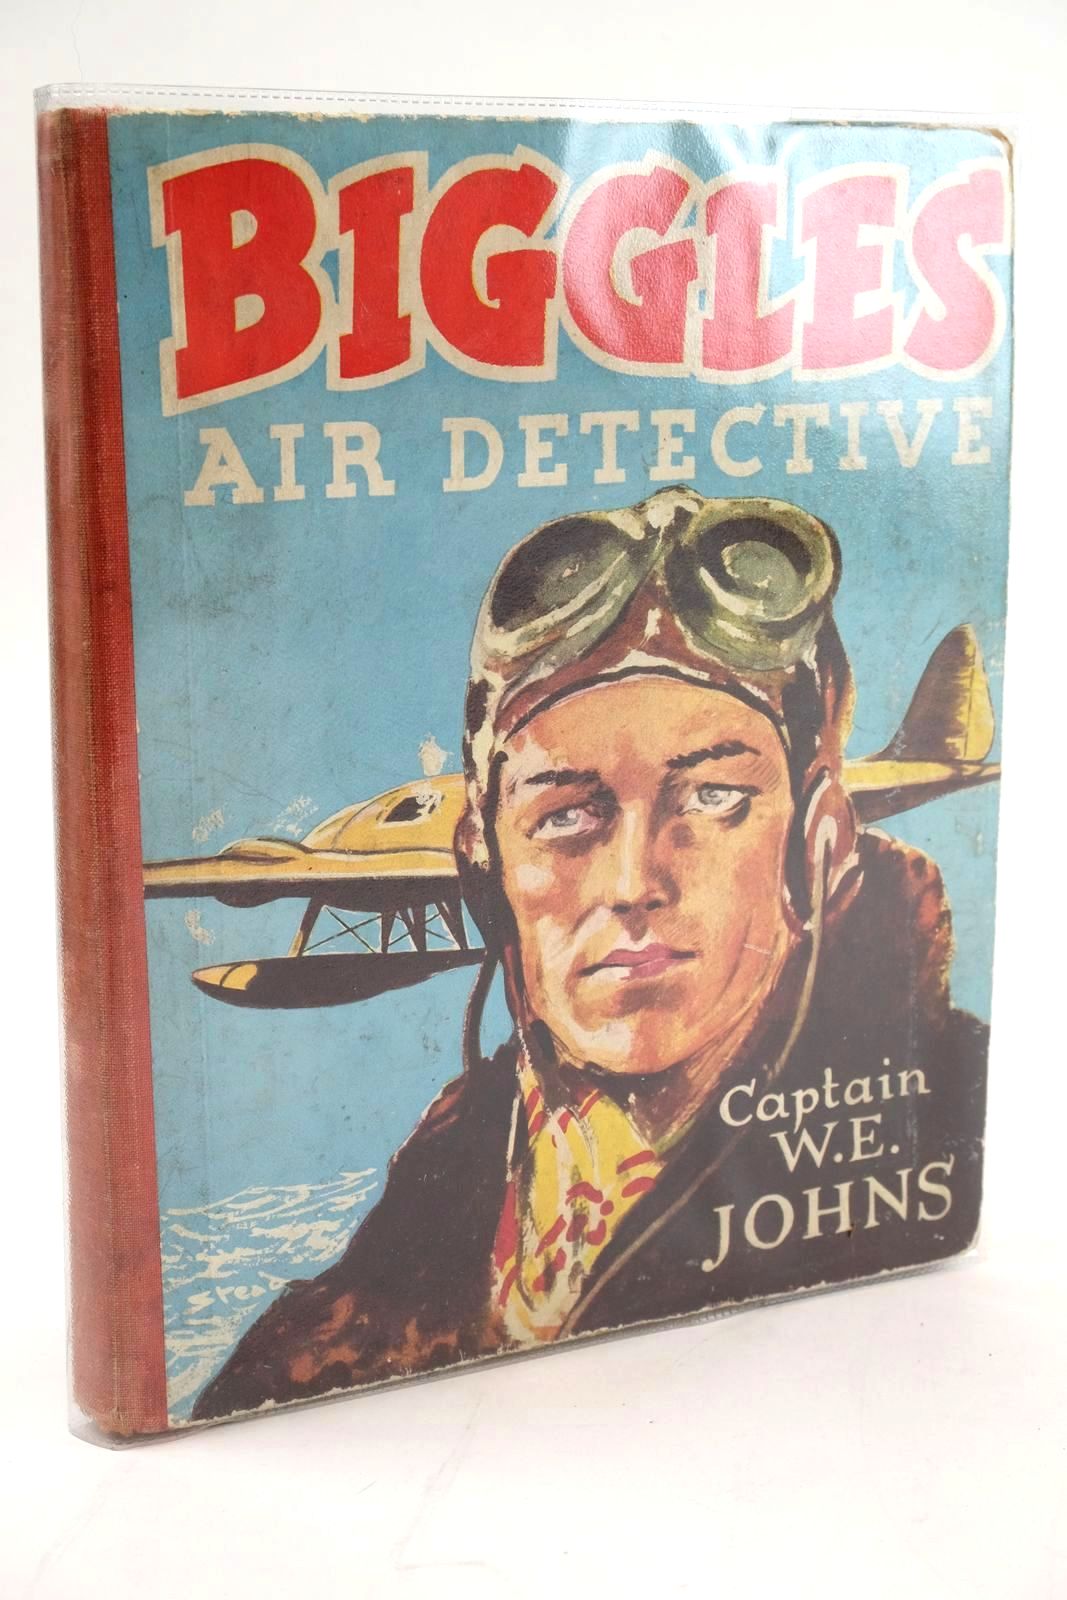 Photo of BIGGLES-AIR DETECTIVE written by Johns, W.E. illustrated by Stead, Leslie published by Marks &amp; Spencer (STOCK CODE: 1324367)  for sale by Stella & Rose's Books